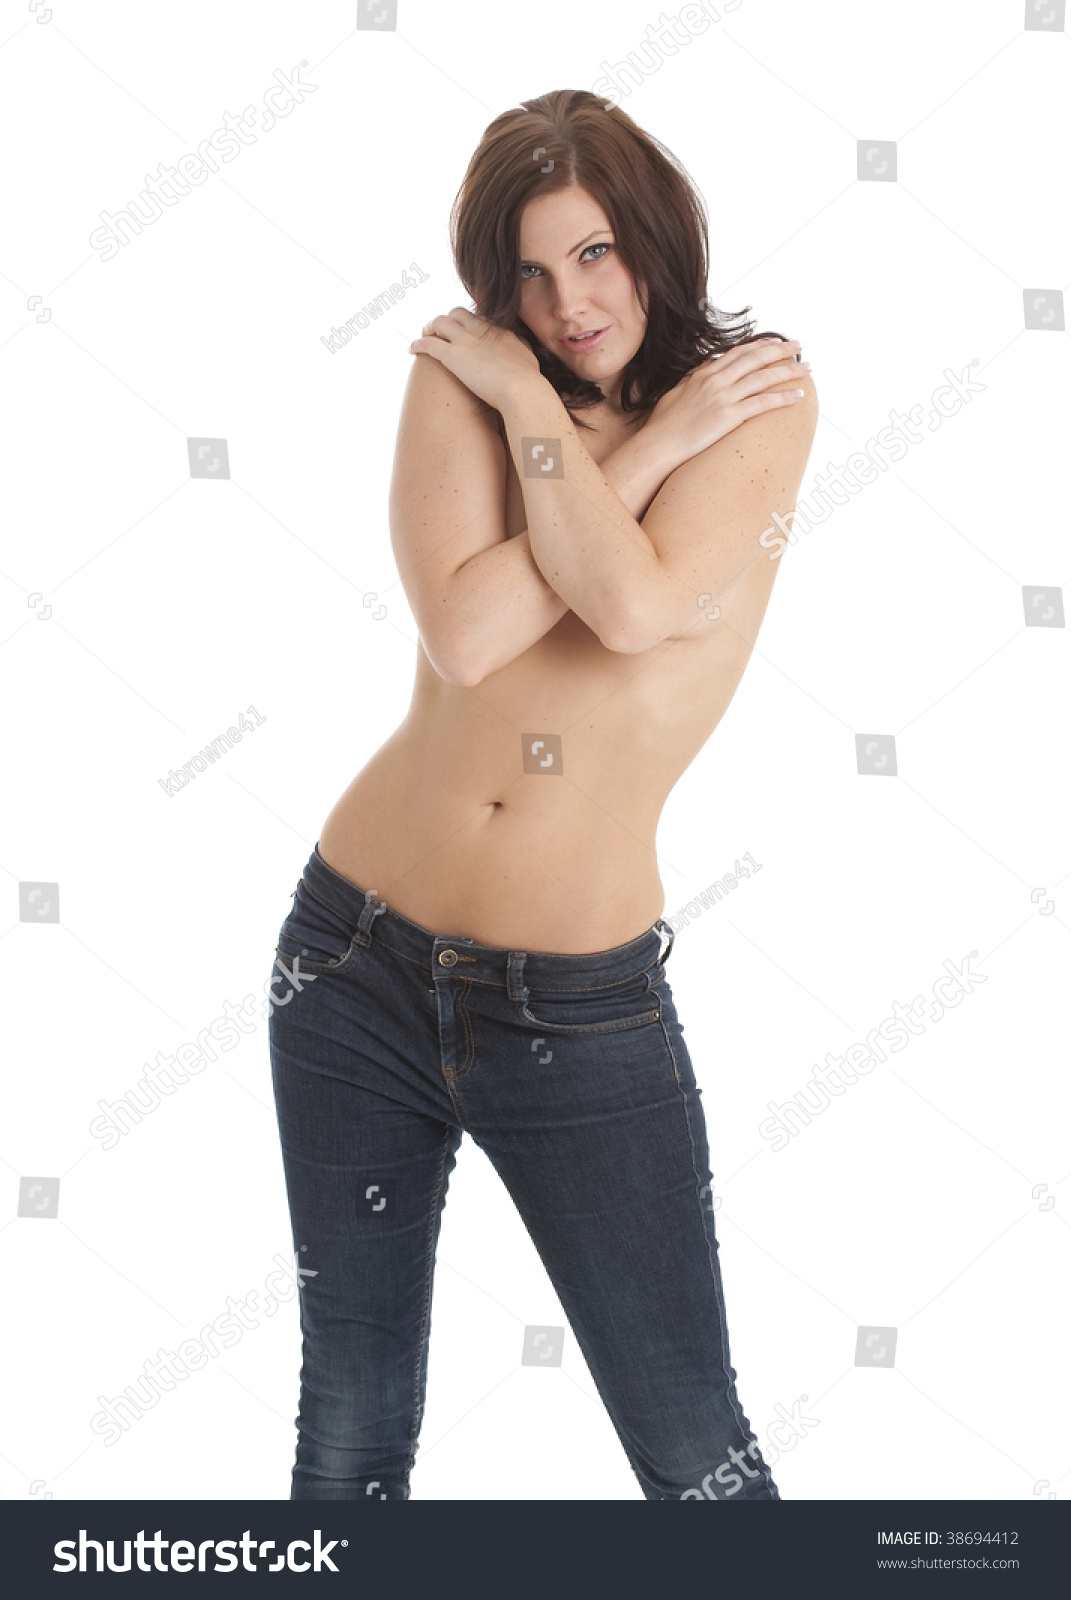 Best of Topless in blue jeans